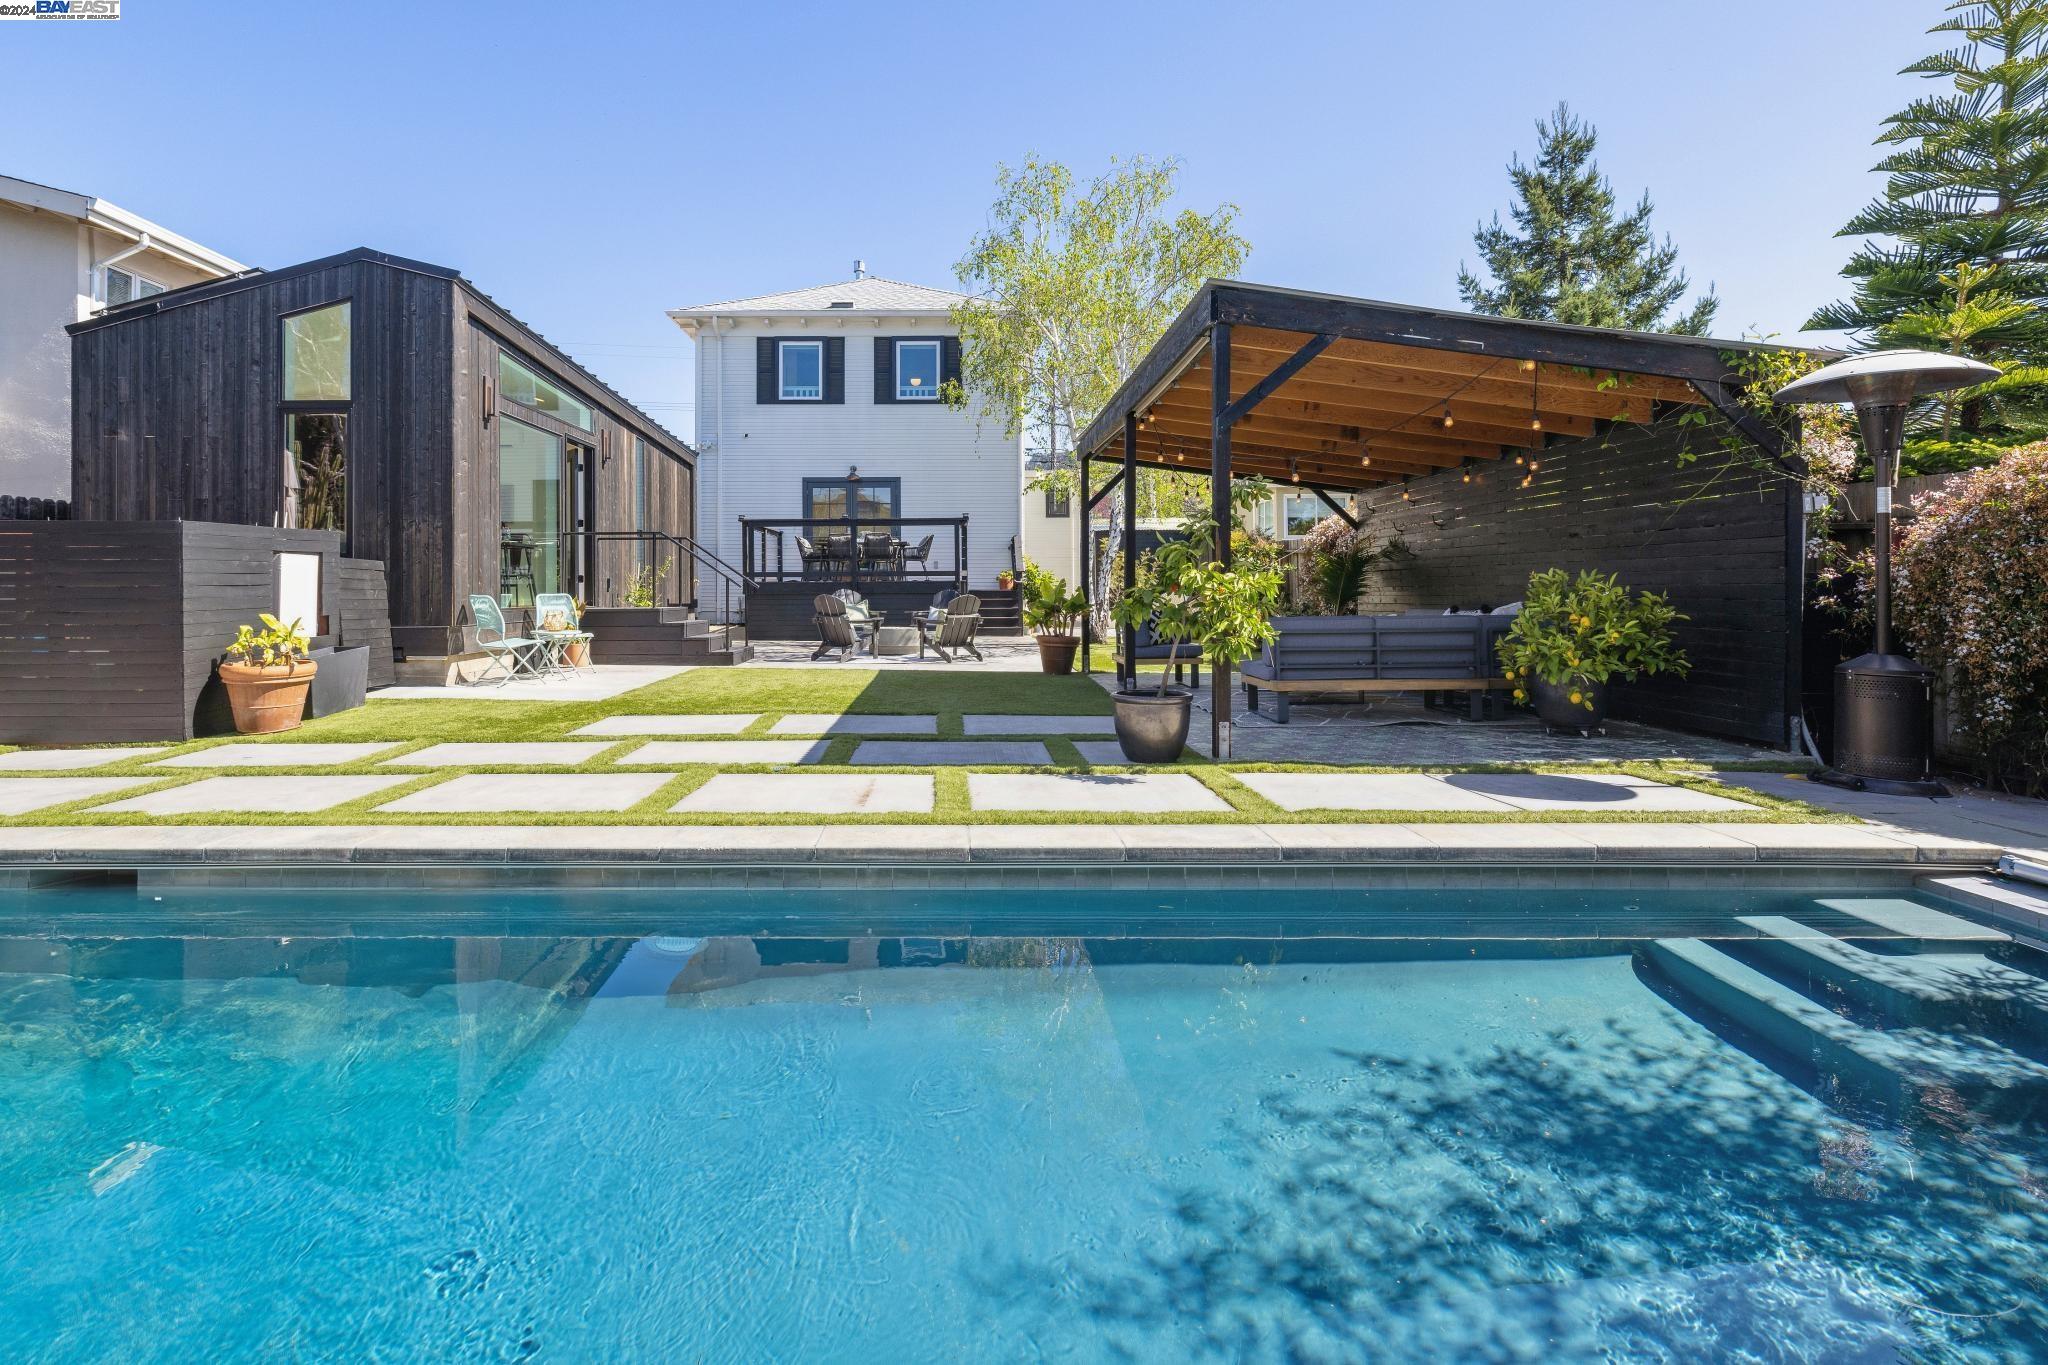 a view of swimming pool in the backyard of house along with outdoor seating